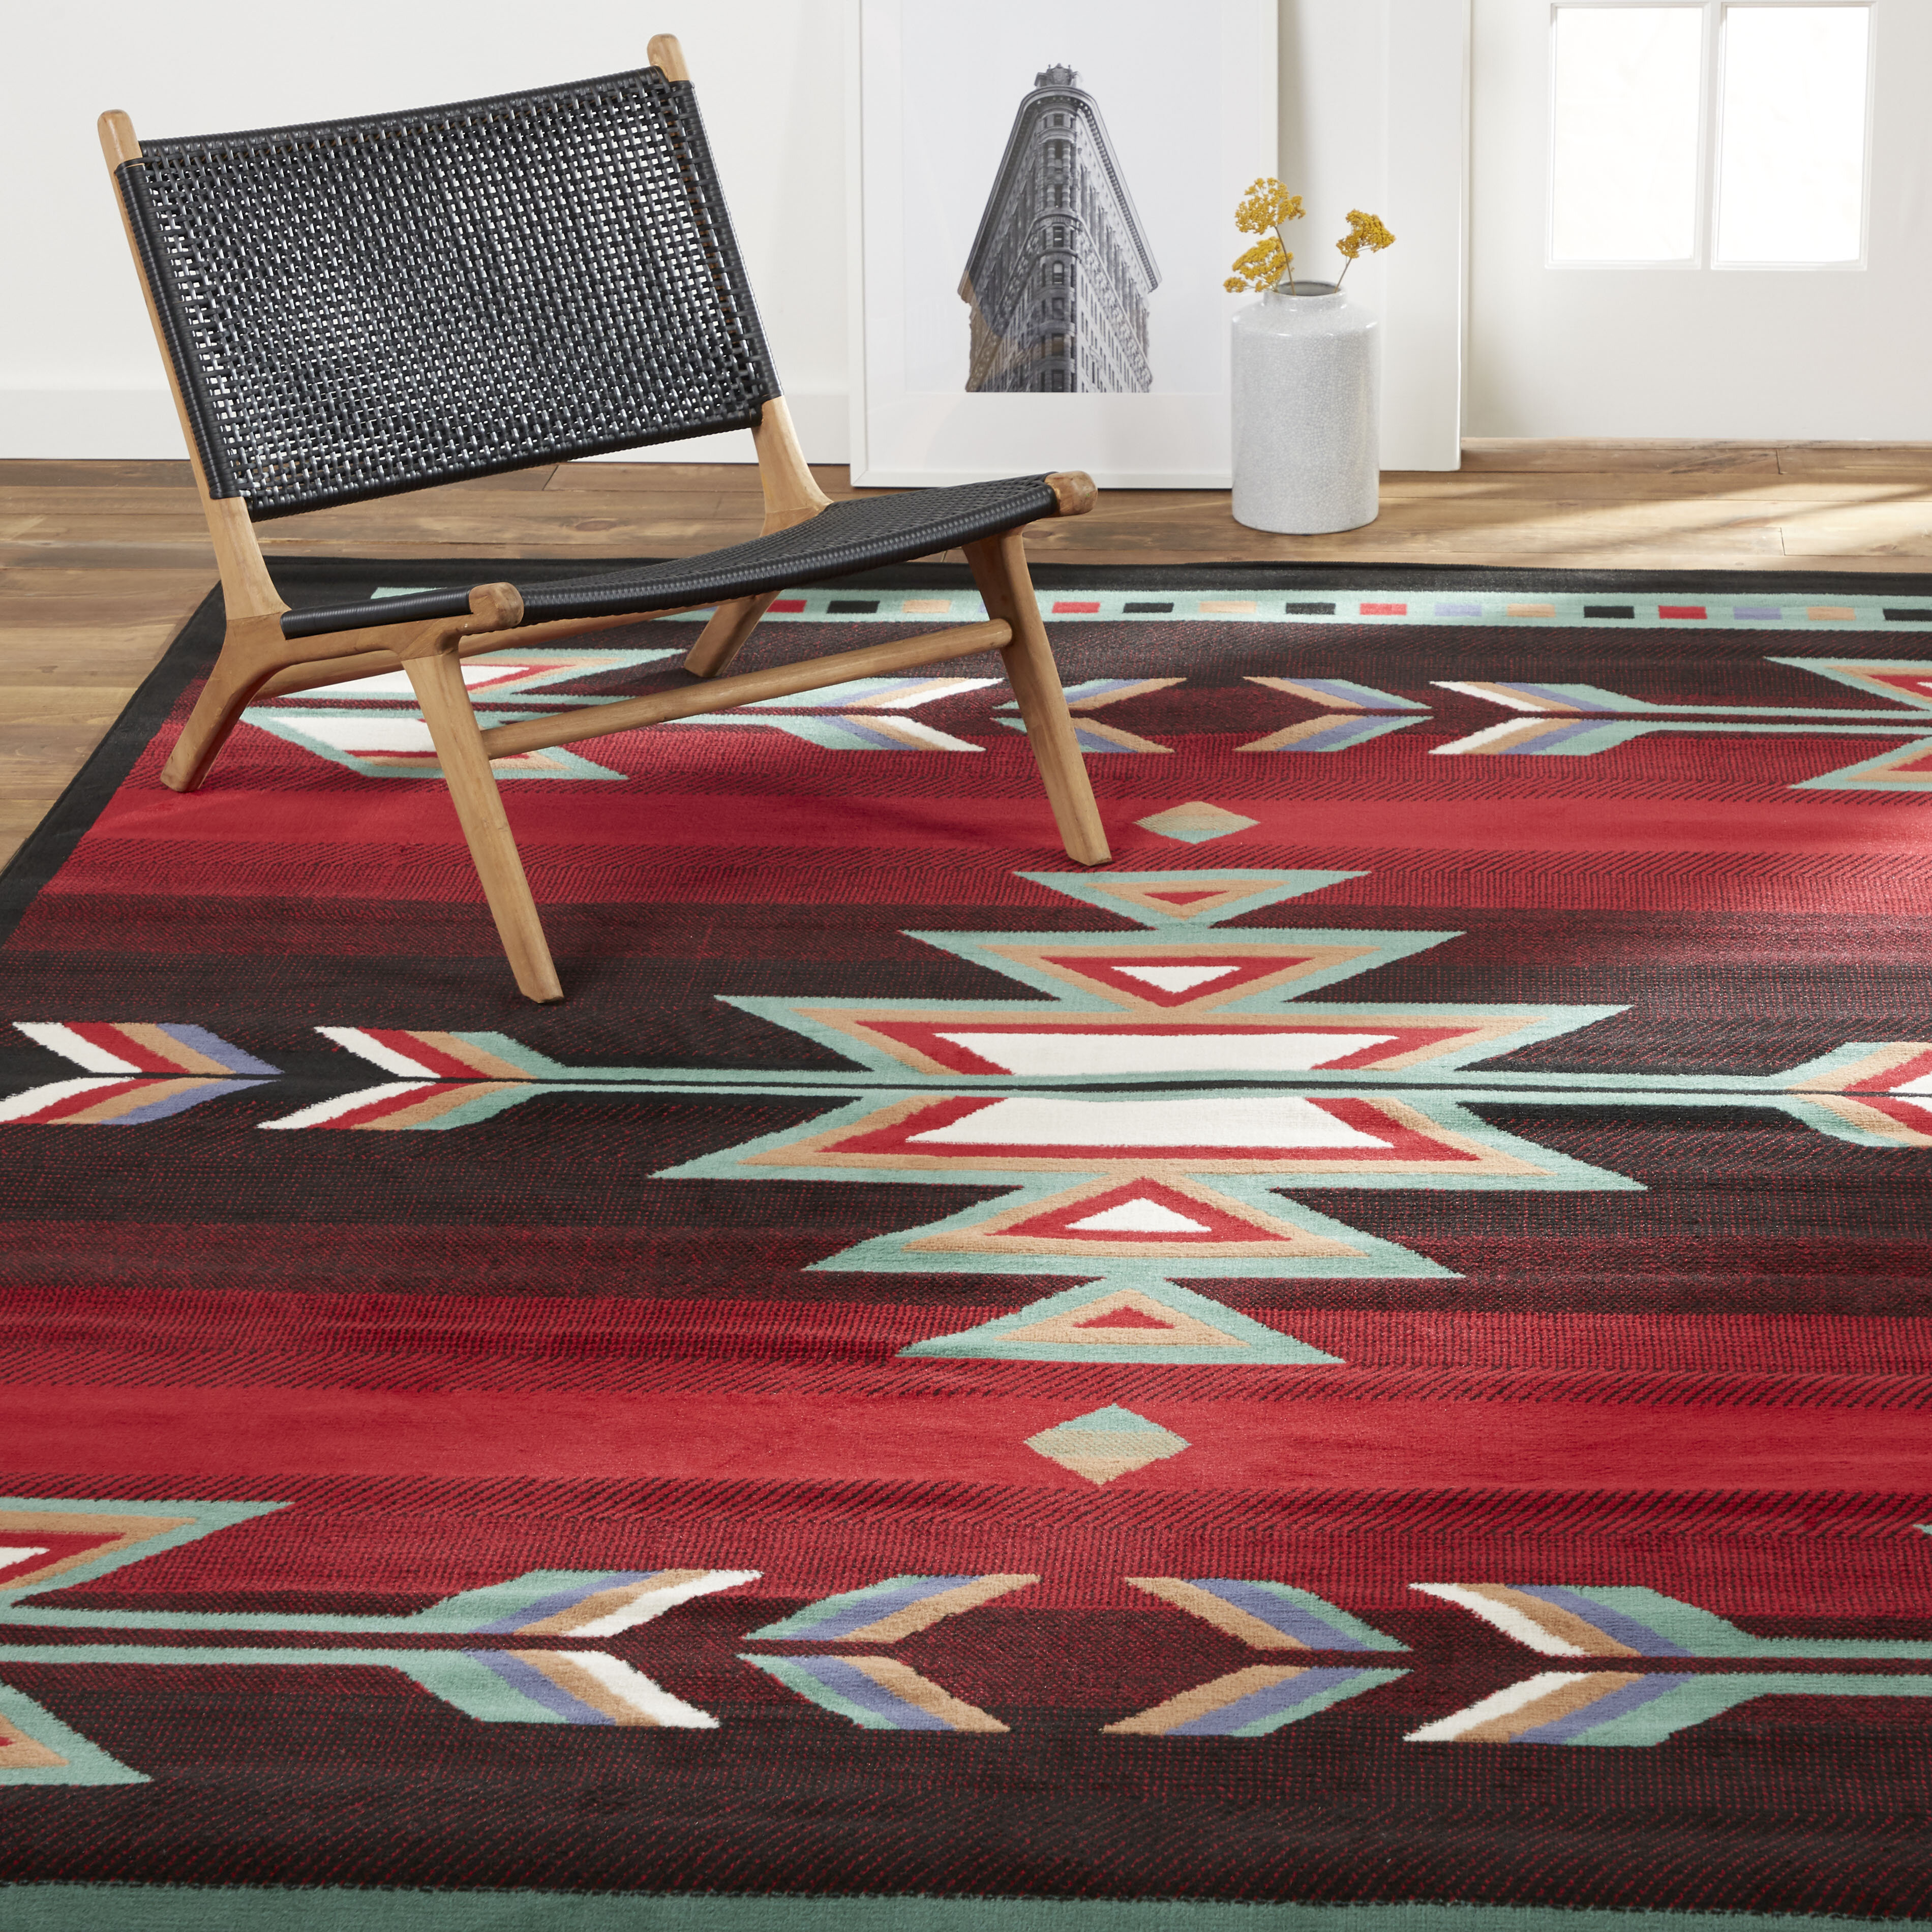 Soutwhestern Style Rugs